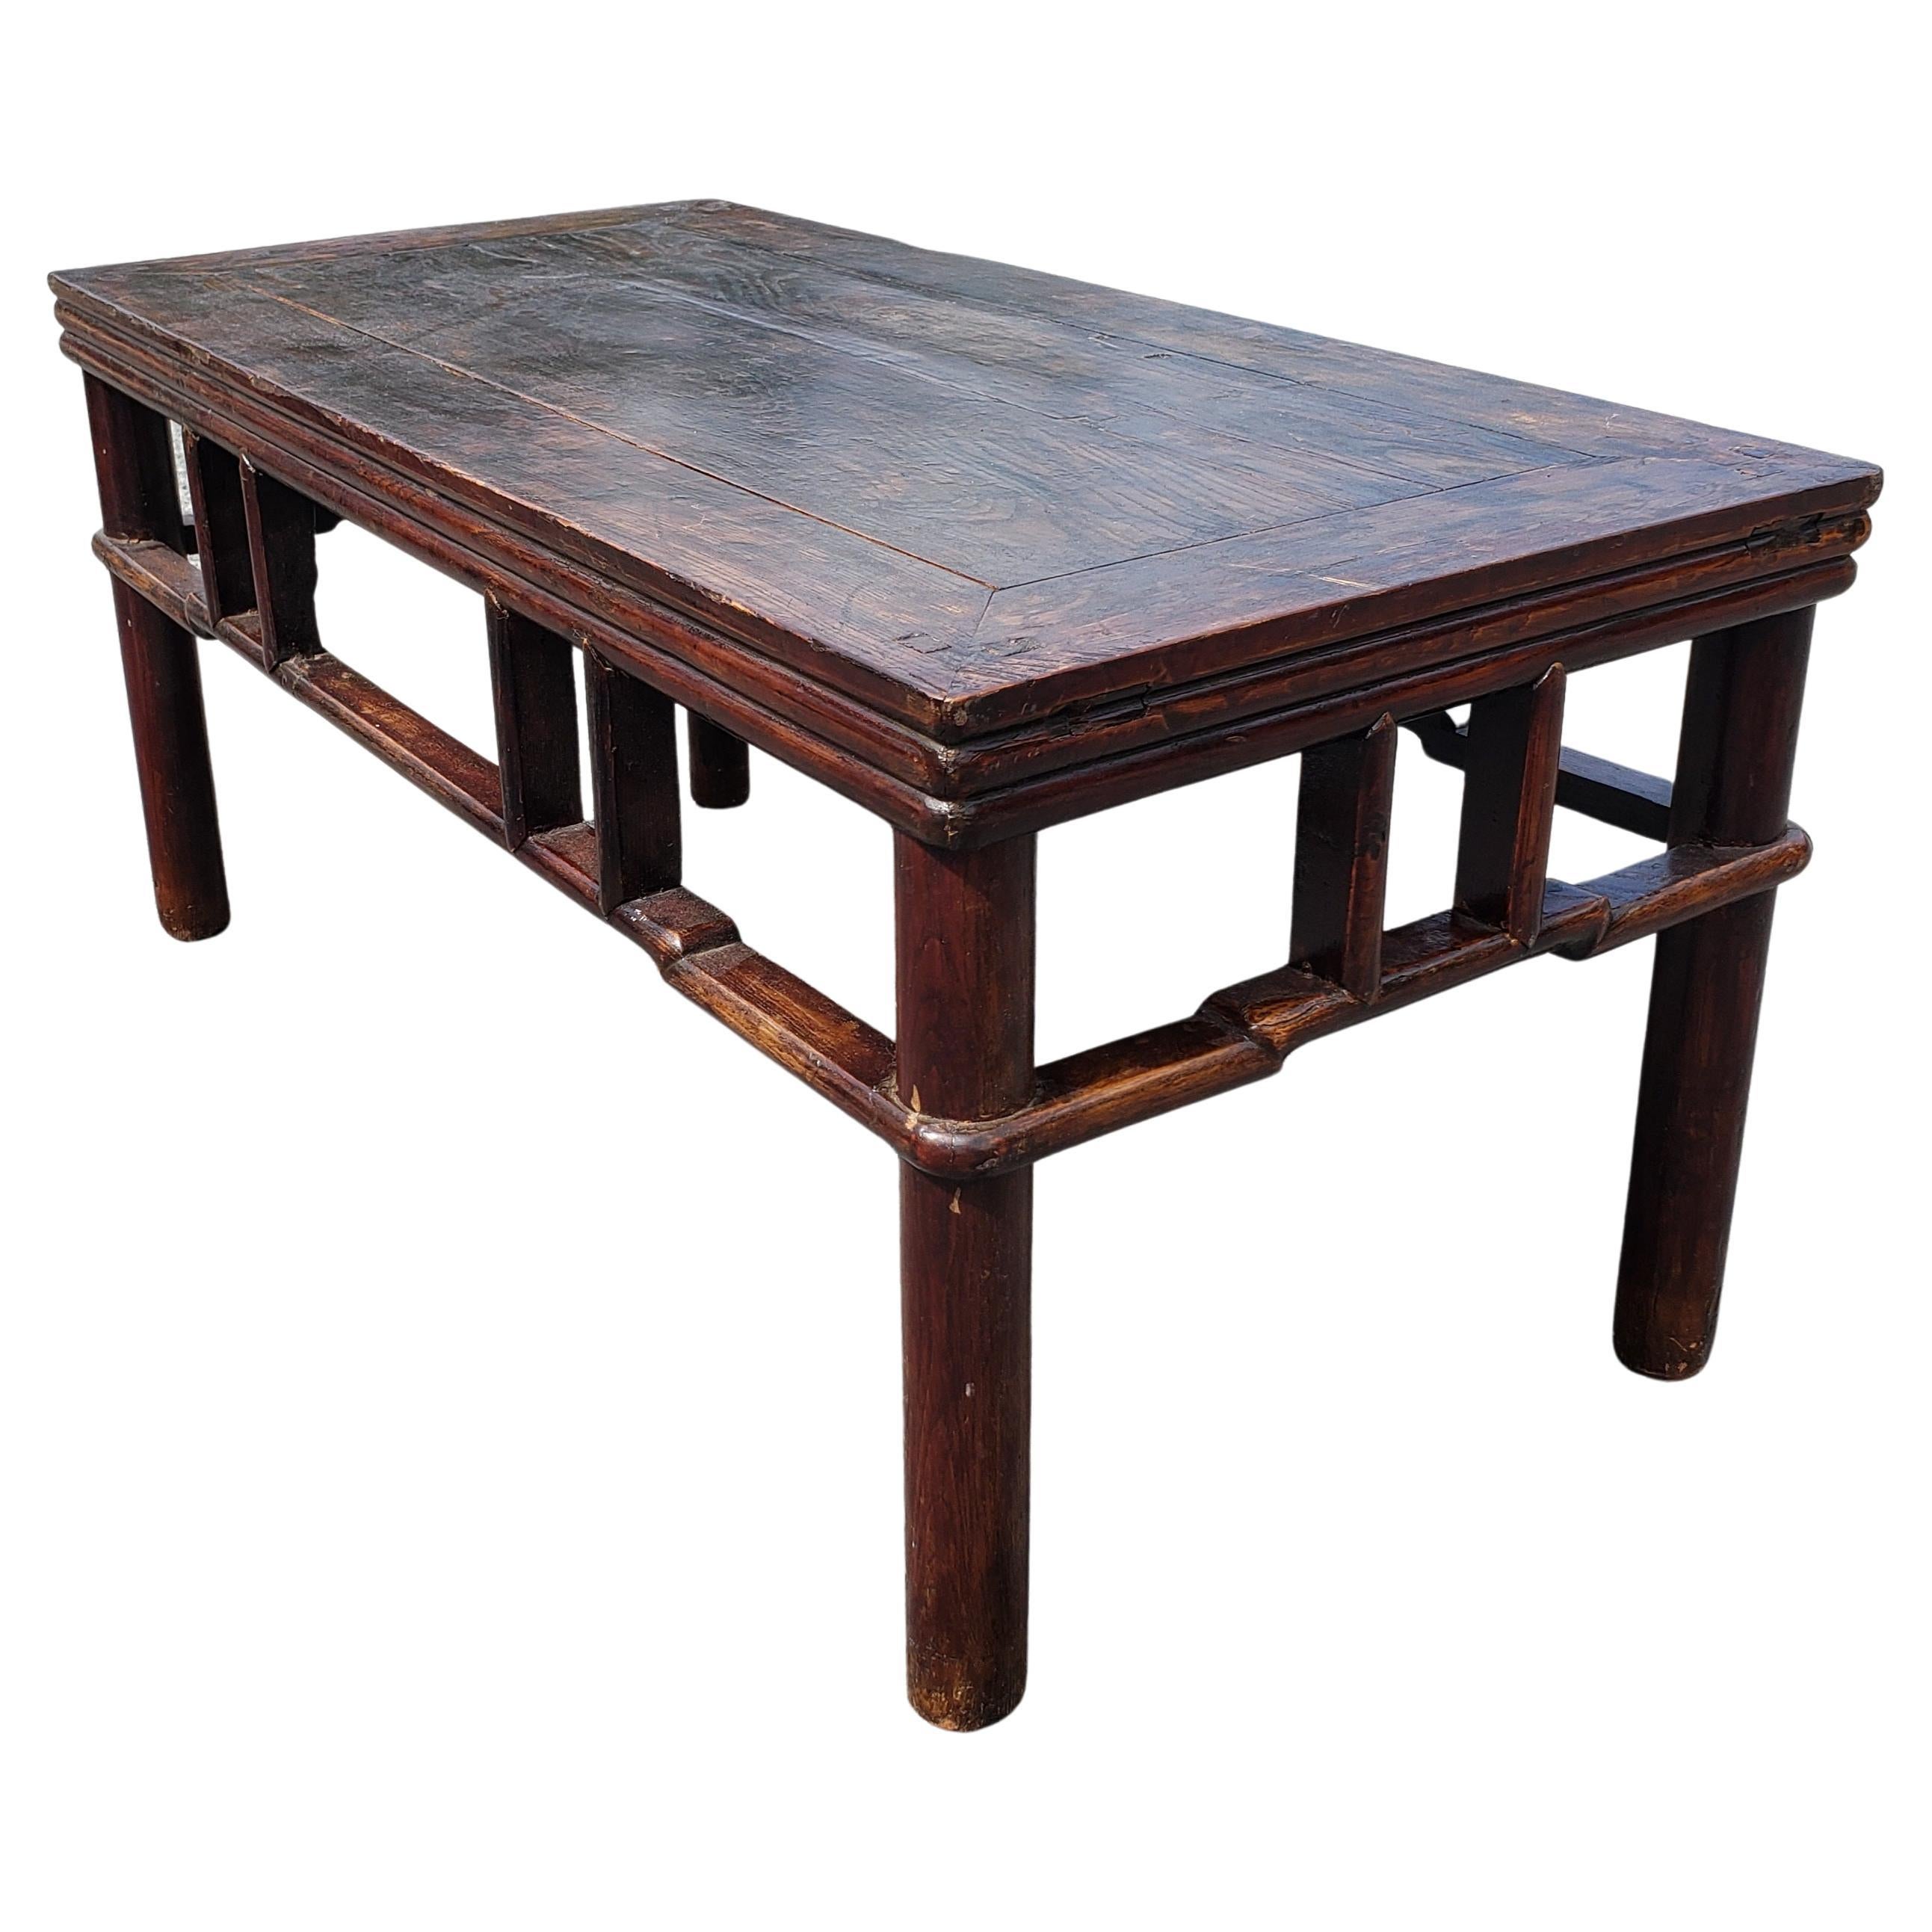 An early 1800s Chinese Qing period Pagoda style coffee table, cocktail in good antique condition. Very nice patina. Measures 37.5 inches in width, 19 inches in depth and stands 21.5 inches tall.